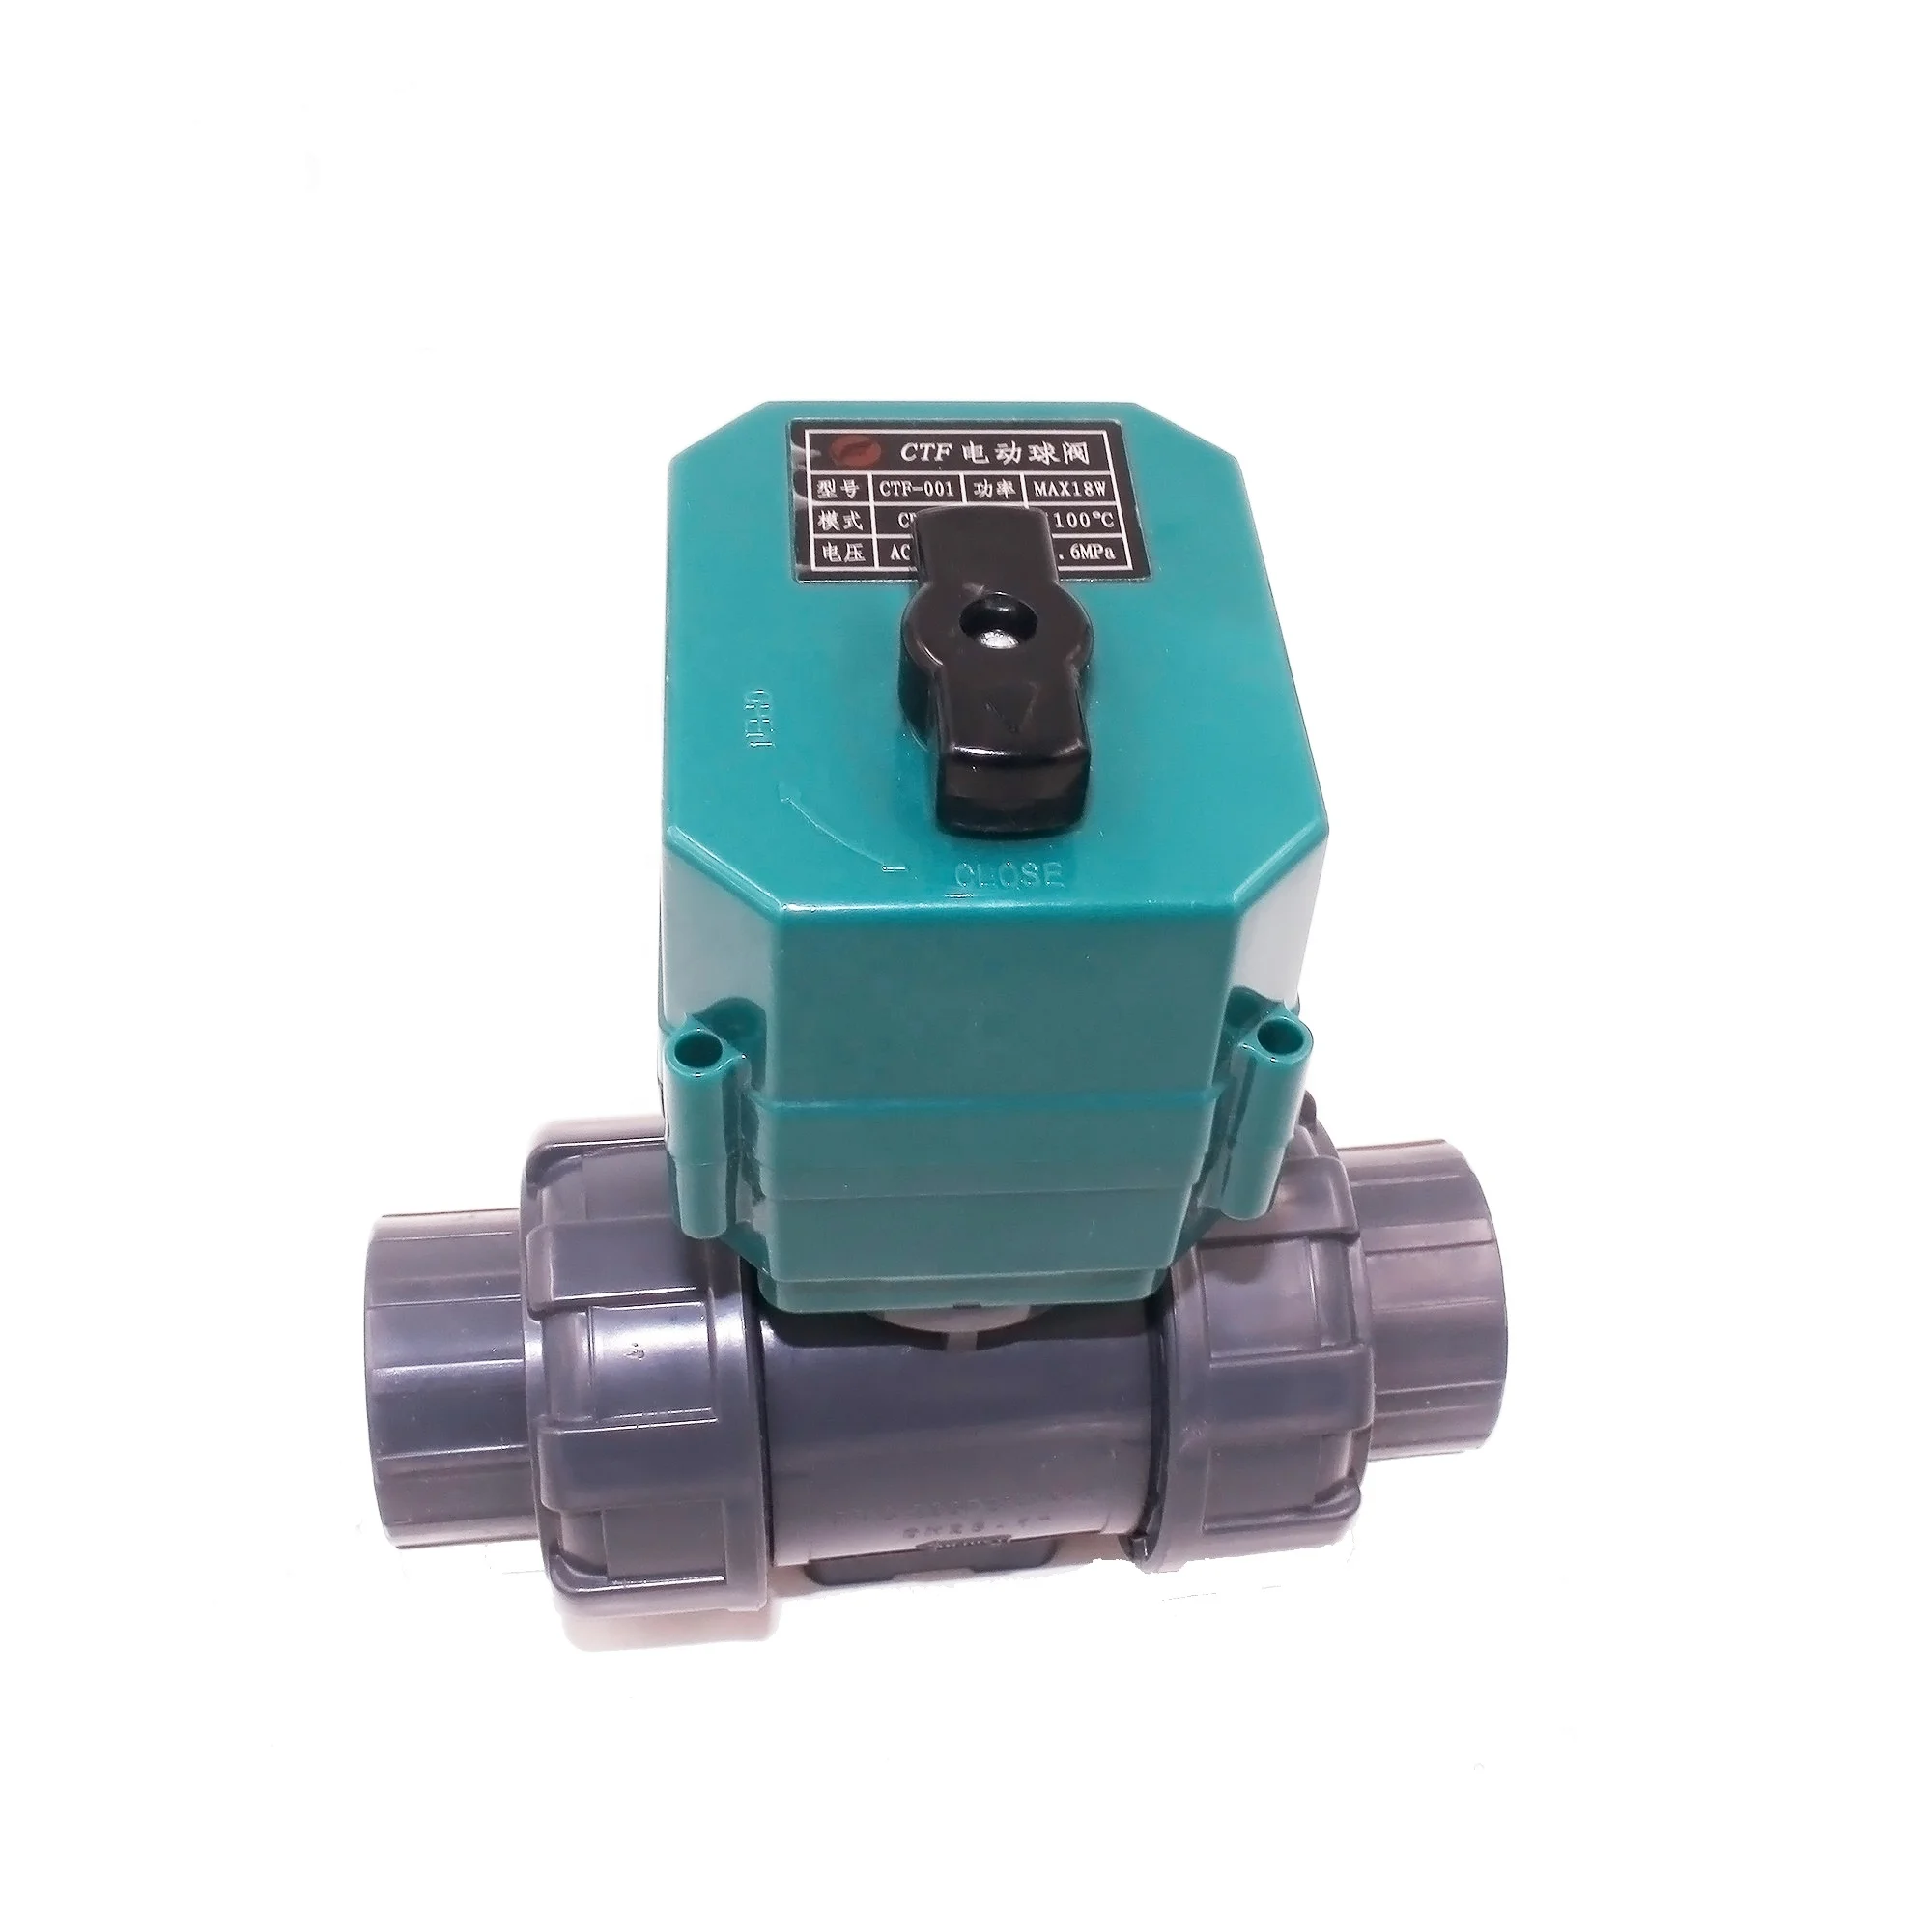 
electric water valve motorized ball valve 2 inch stainless steel 50mm electric actuated motorized ball valve dn50 dn40 dn32 dn25 